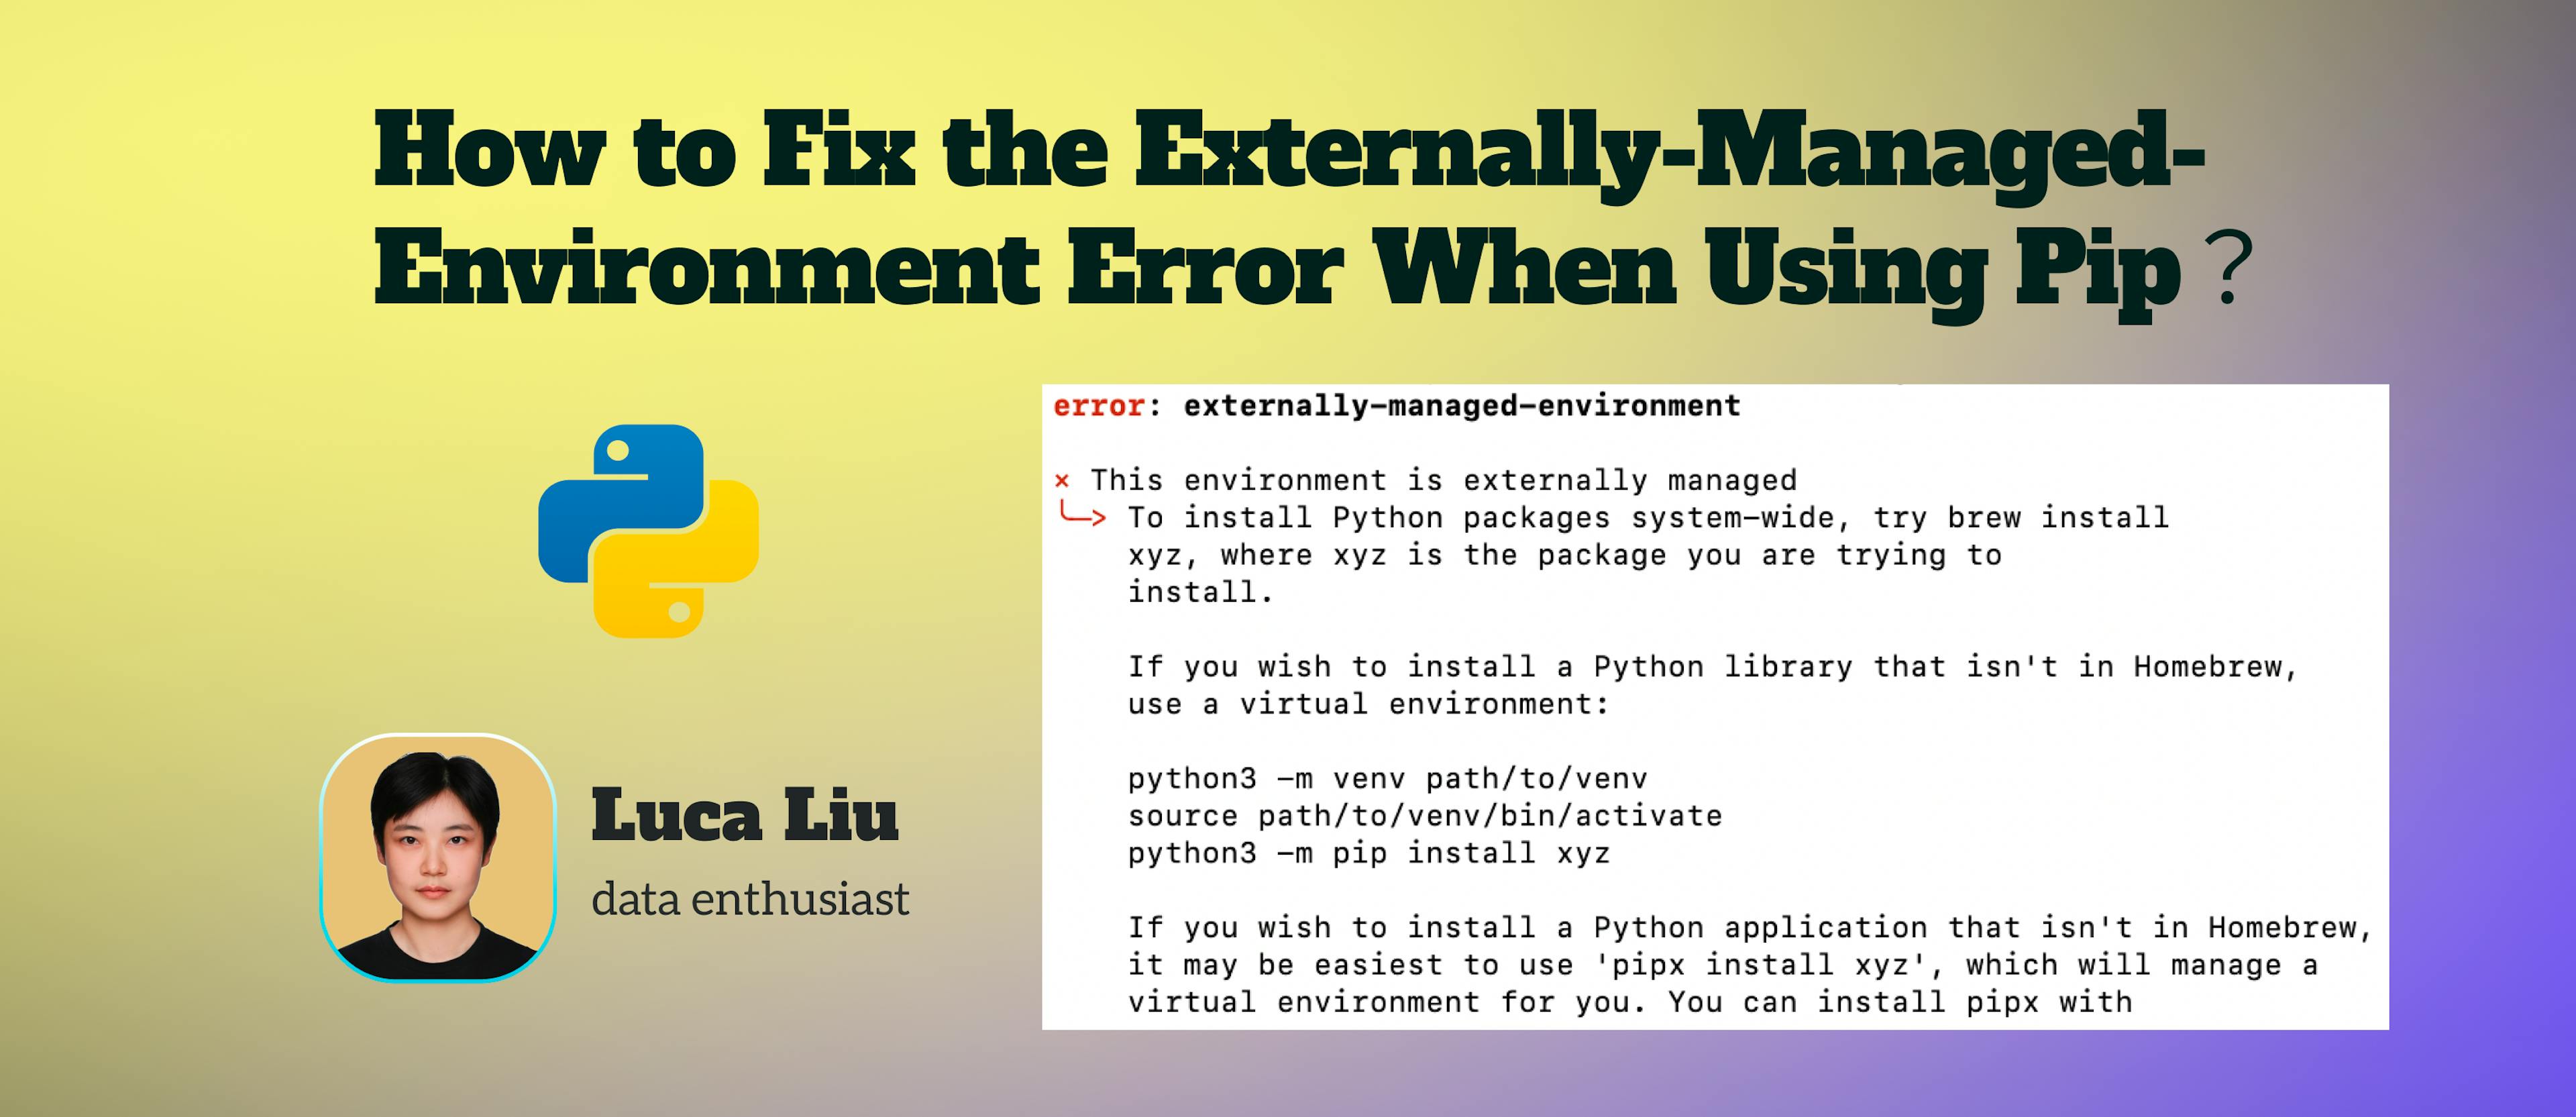 featured image - Fixing the Externally-Managed-Environment Error When Using Pip: A Quick Guide